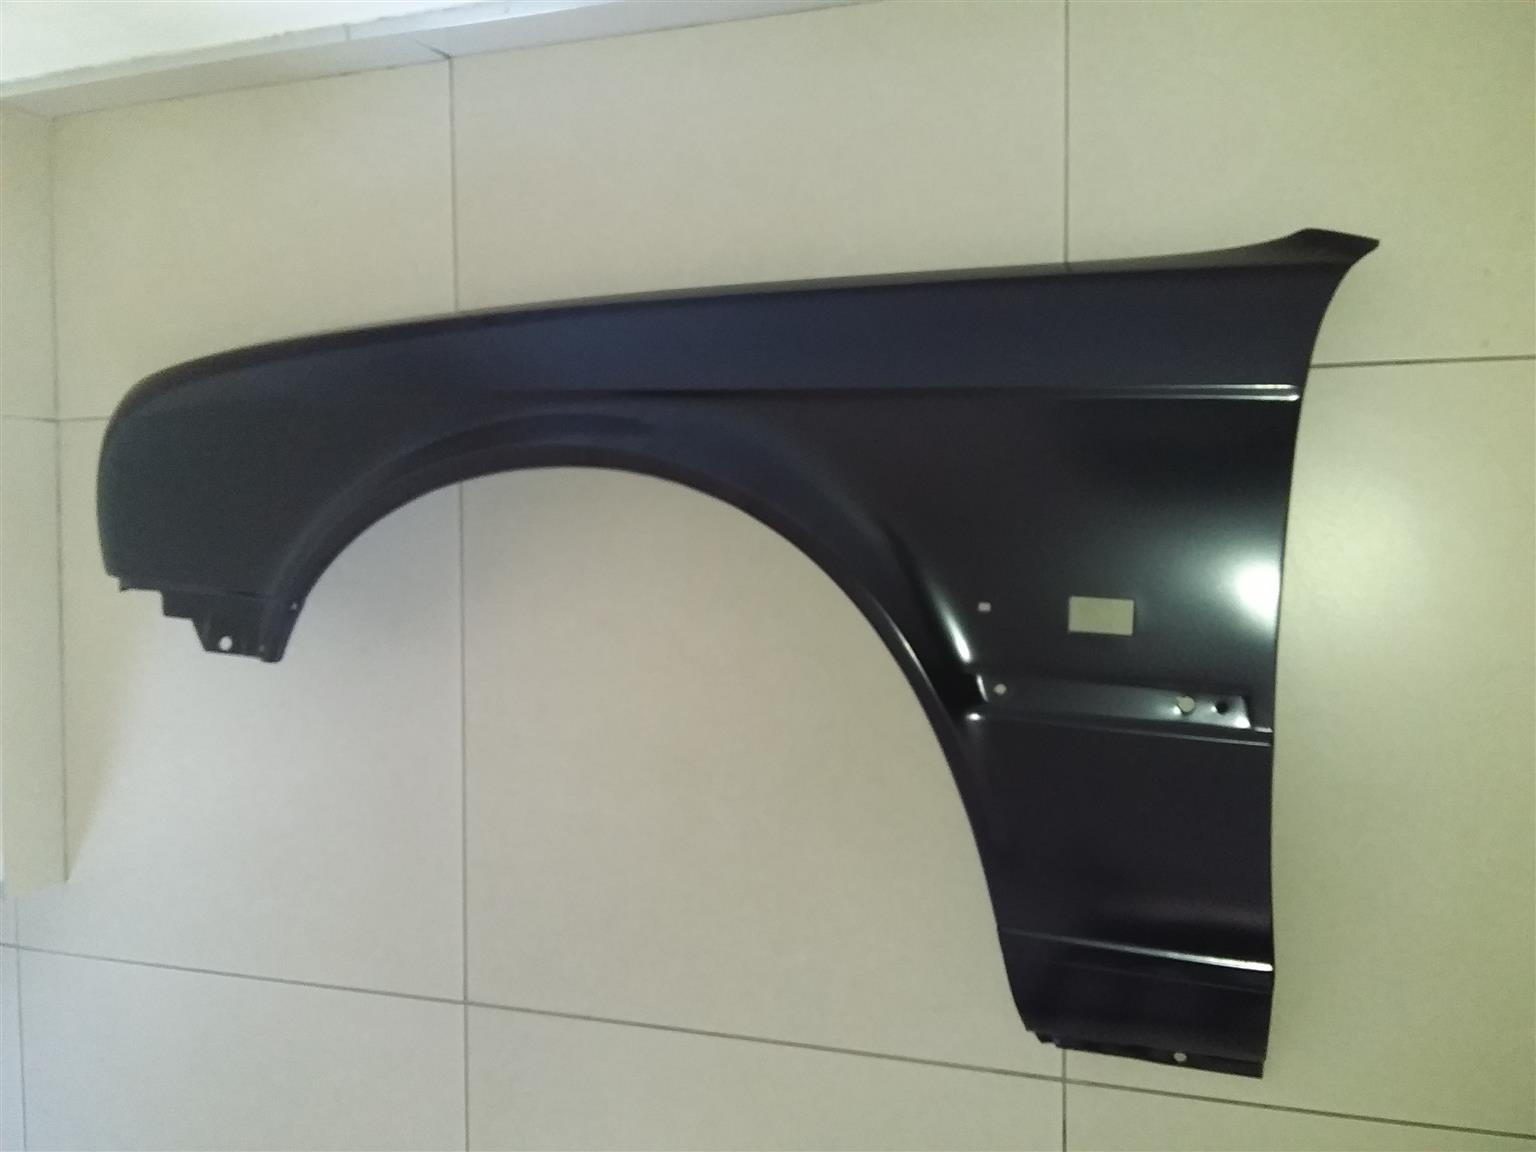 BMW E30 BRAND NEW FENDERS FOR SALE 